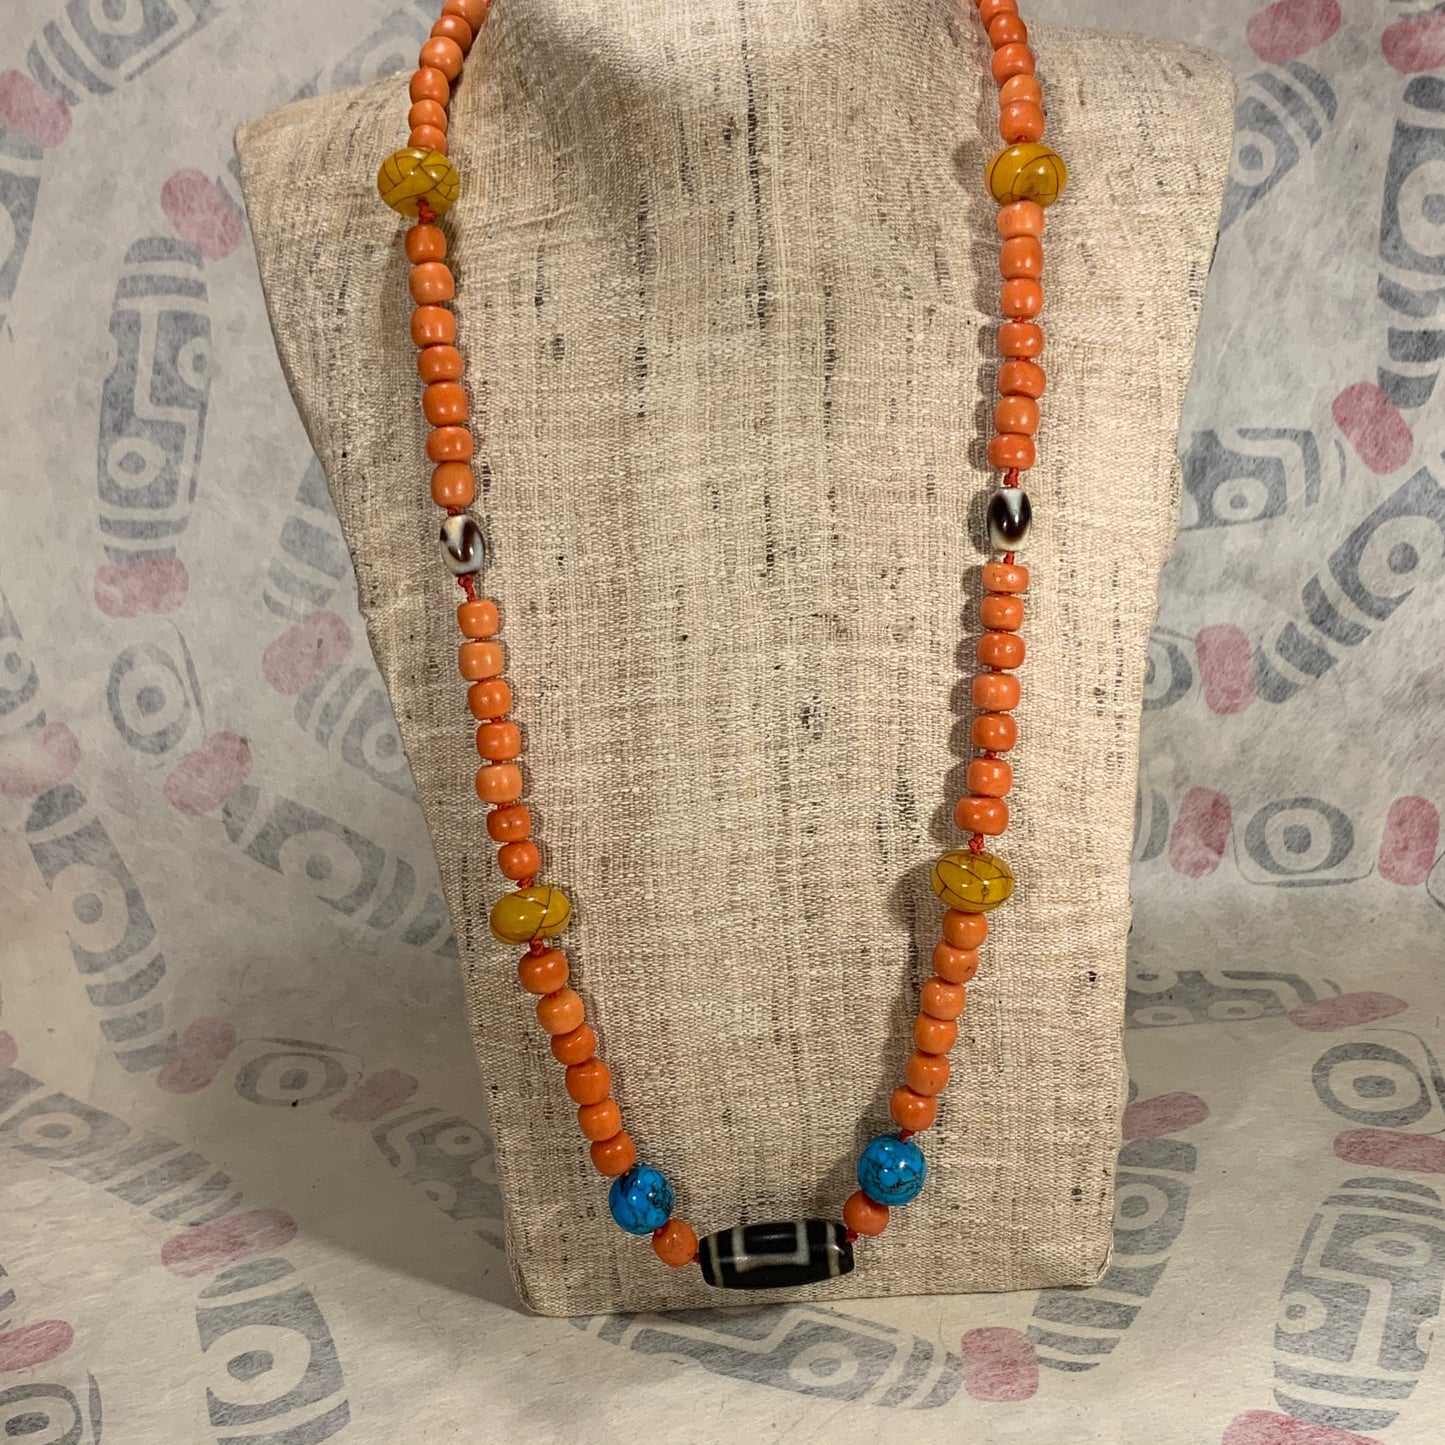 Necklace with vintage beads